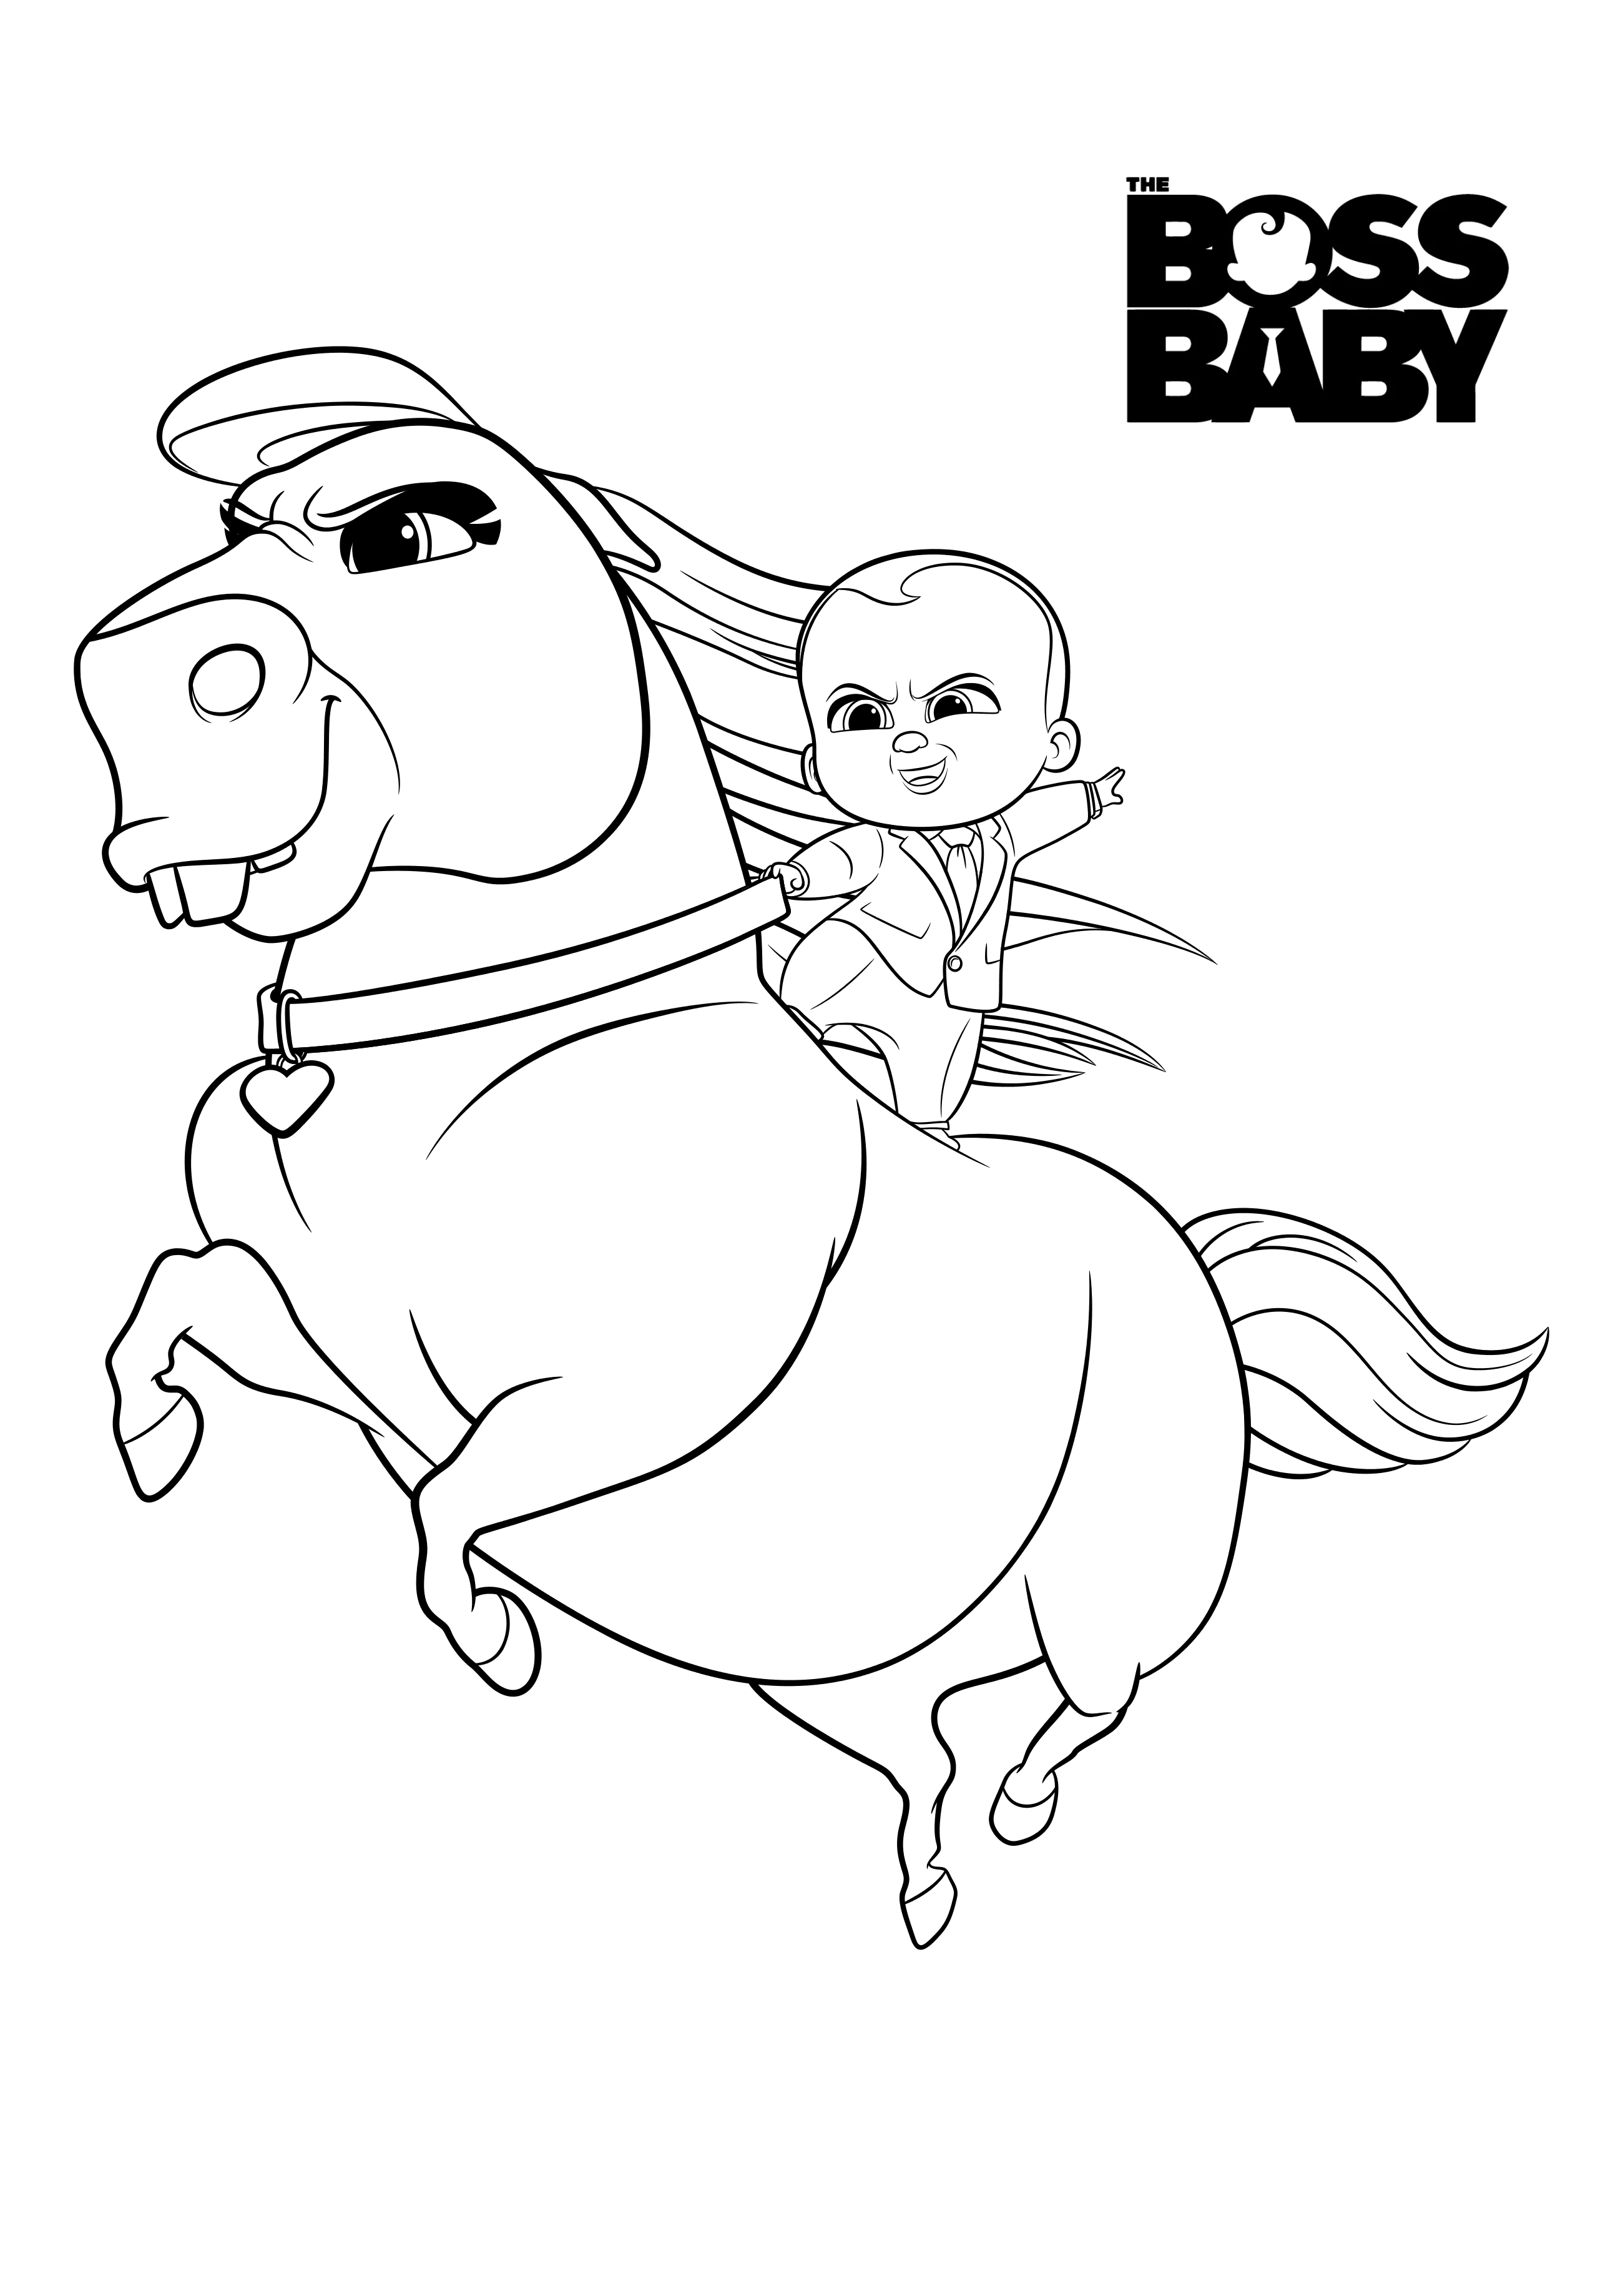 Coloriage Boss Baby 2 Boss Baby et poney